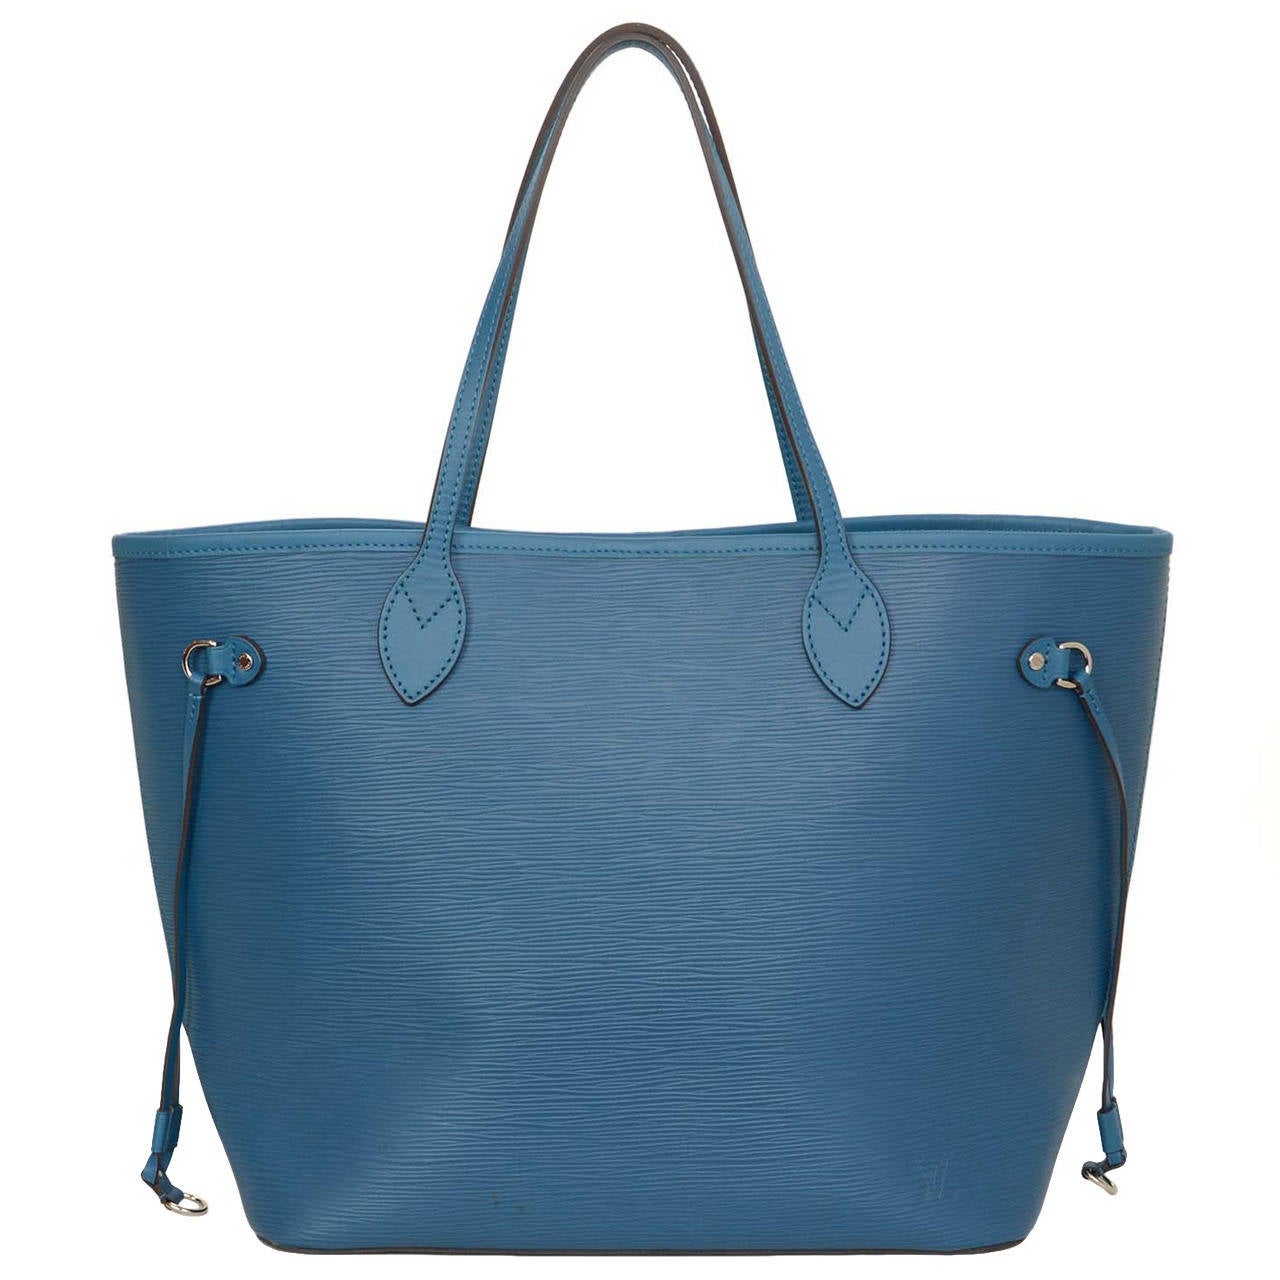 LOUIS VUITTON 2013 Teal Epi Leather Neverfull MM Tote Bag rt $2,050 at 1stdibs